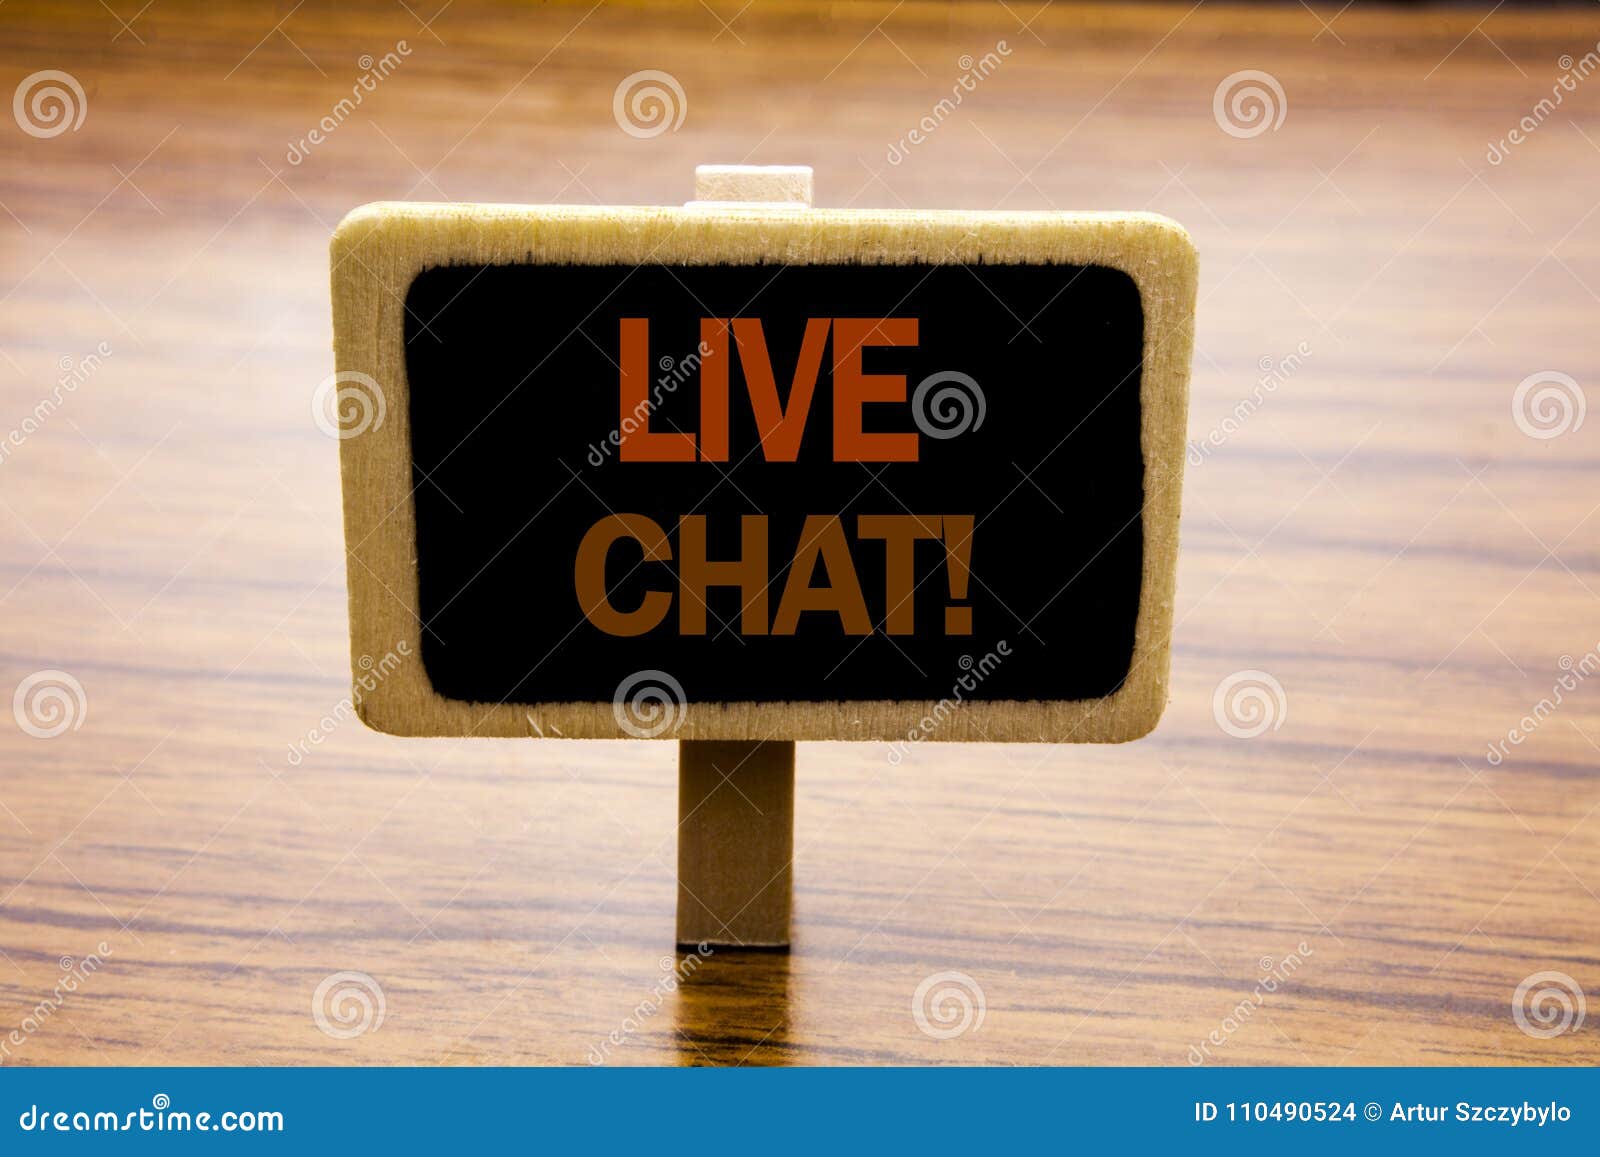 conceptual hand writing text caption inspiration showing live chat . business concept for communication livechat written on announ